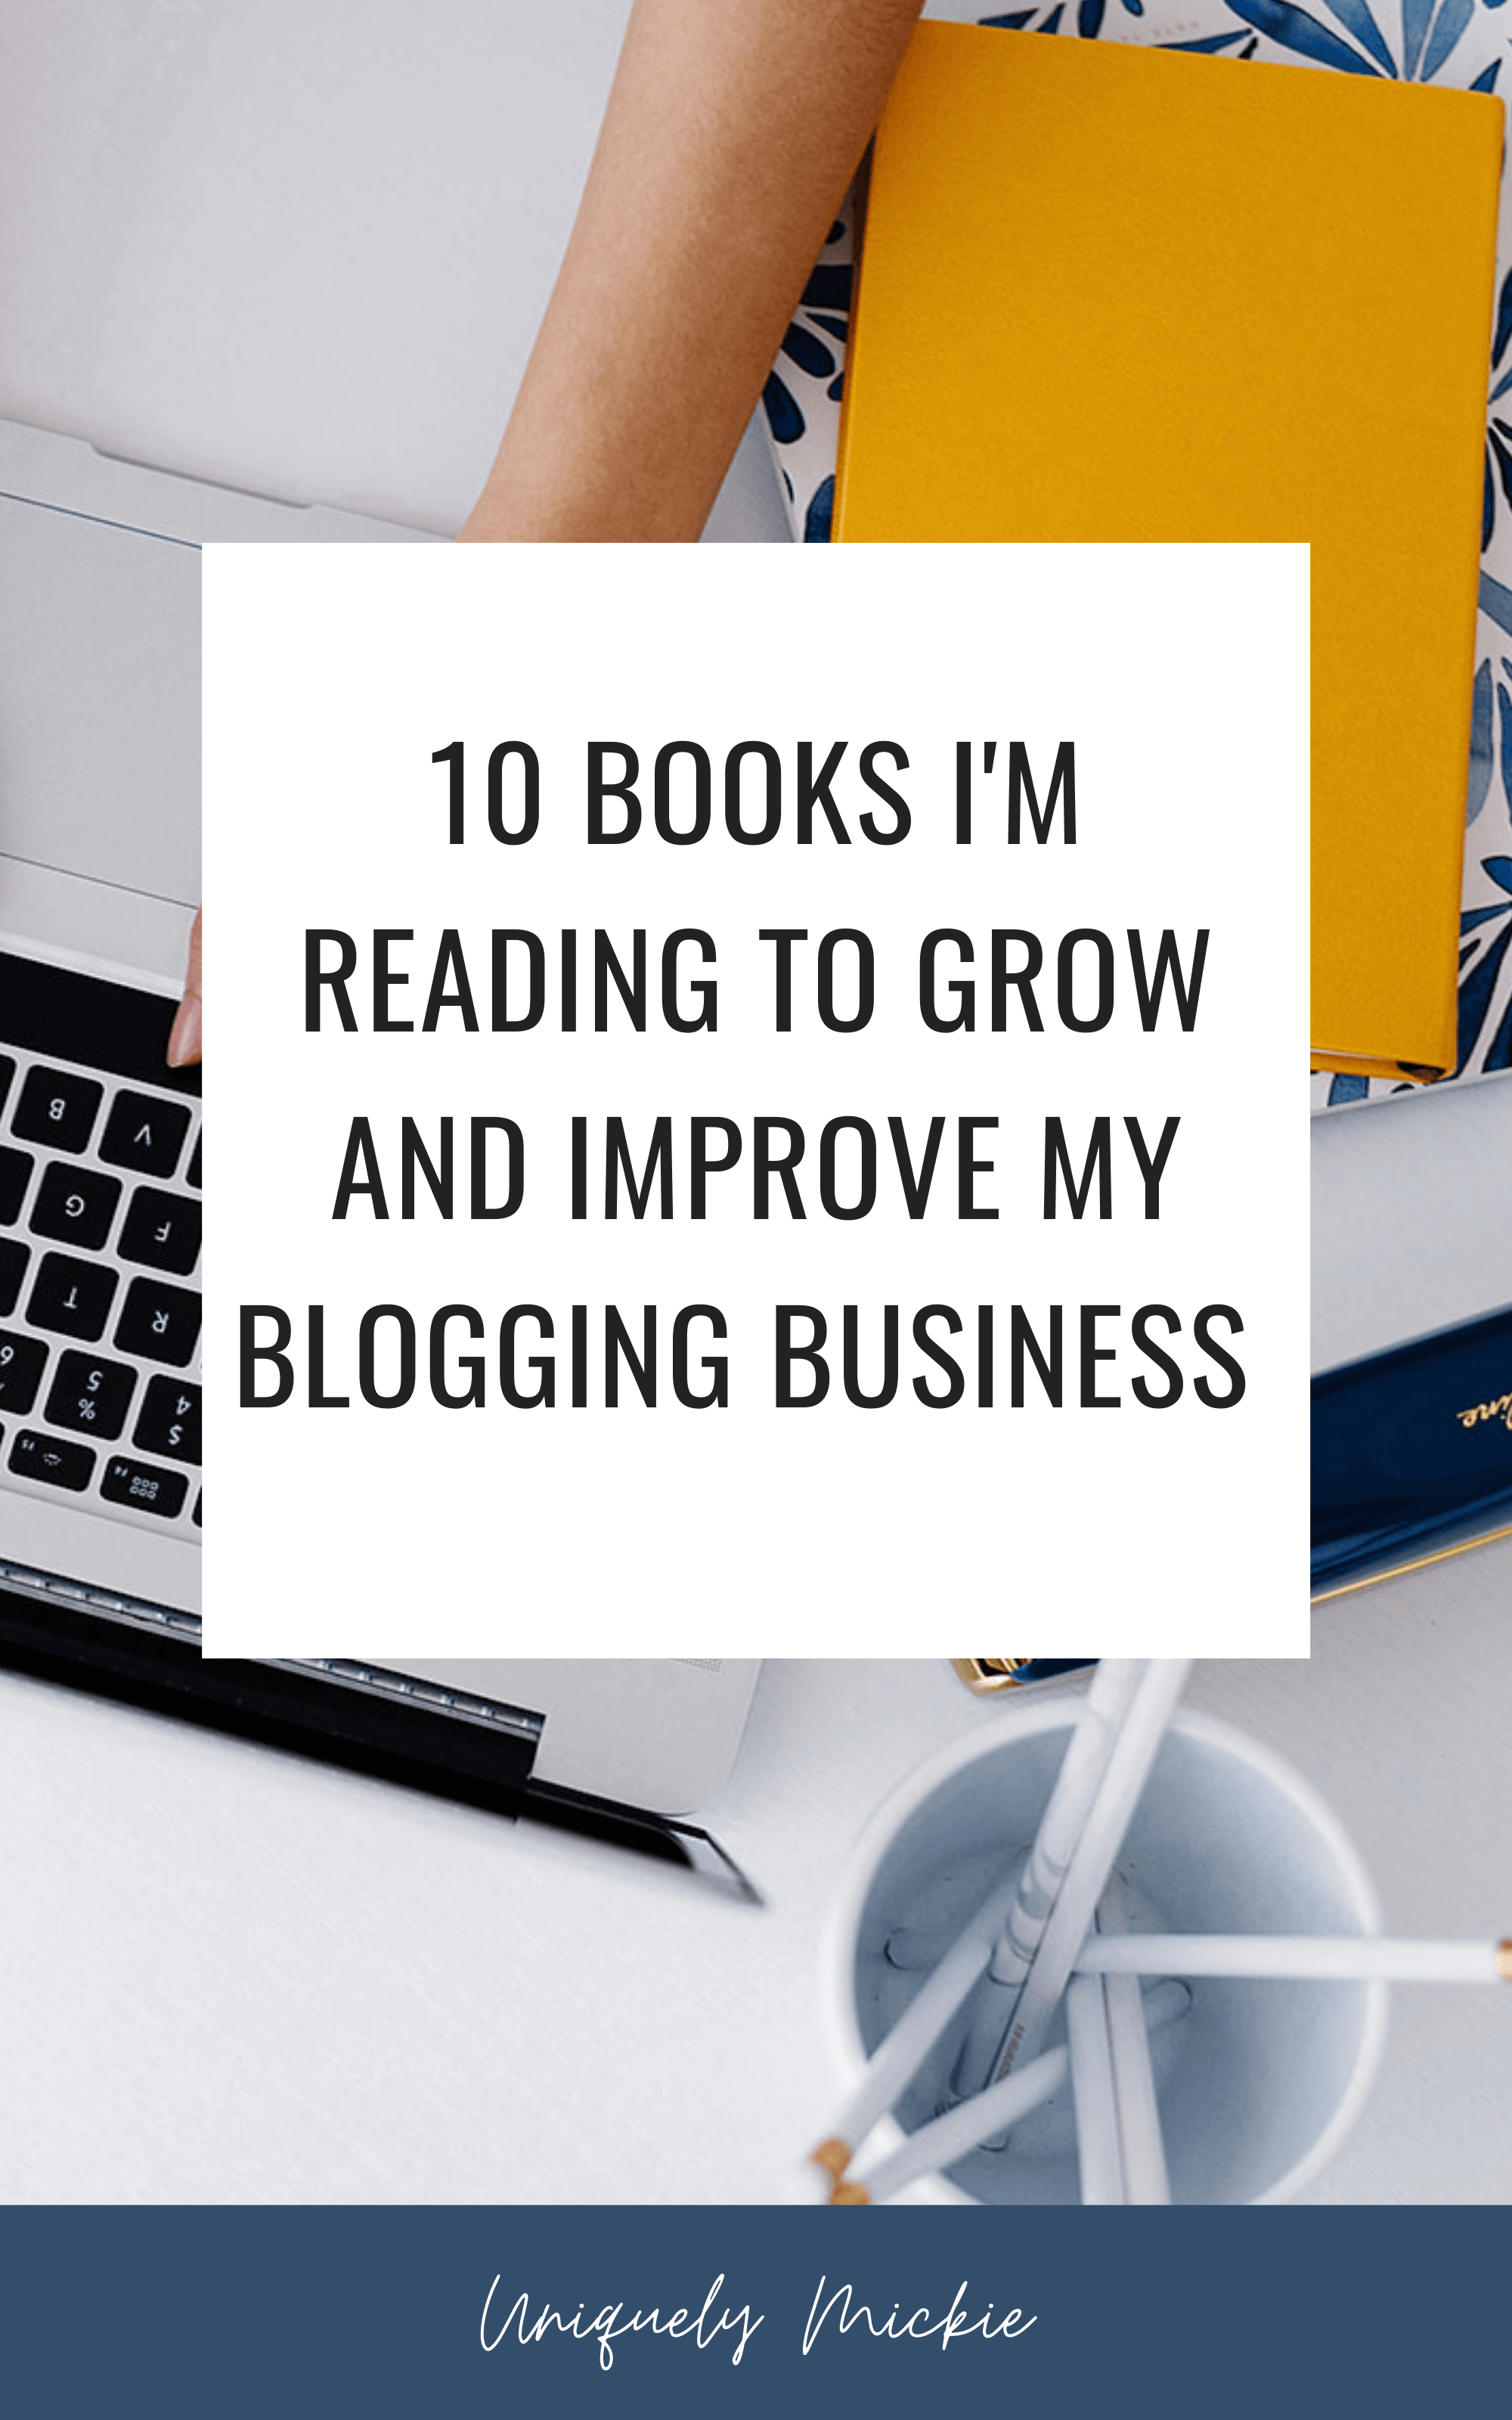 Want to start a new habit of reading? Here are 10 books I'm adding to my reading list to help elevate my business to a cash-producing machine